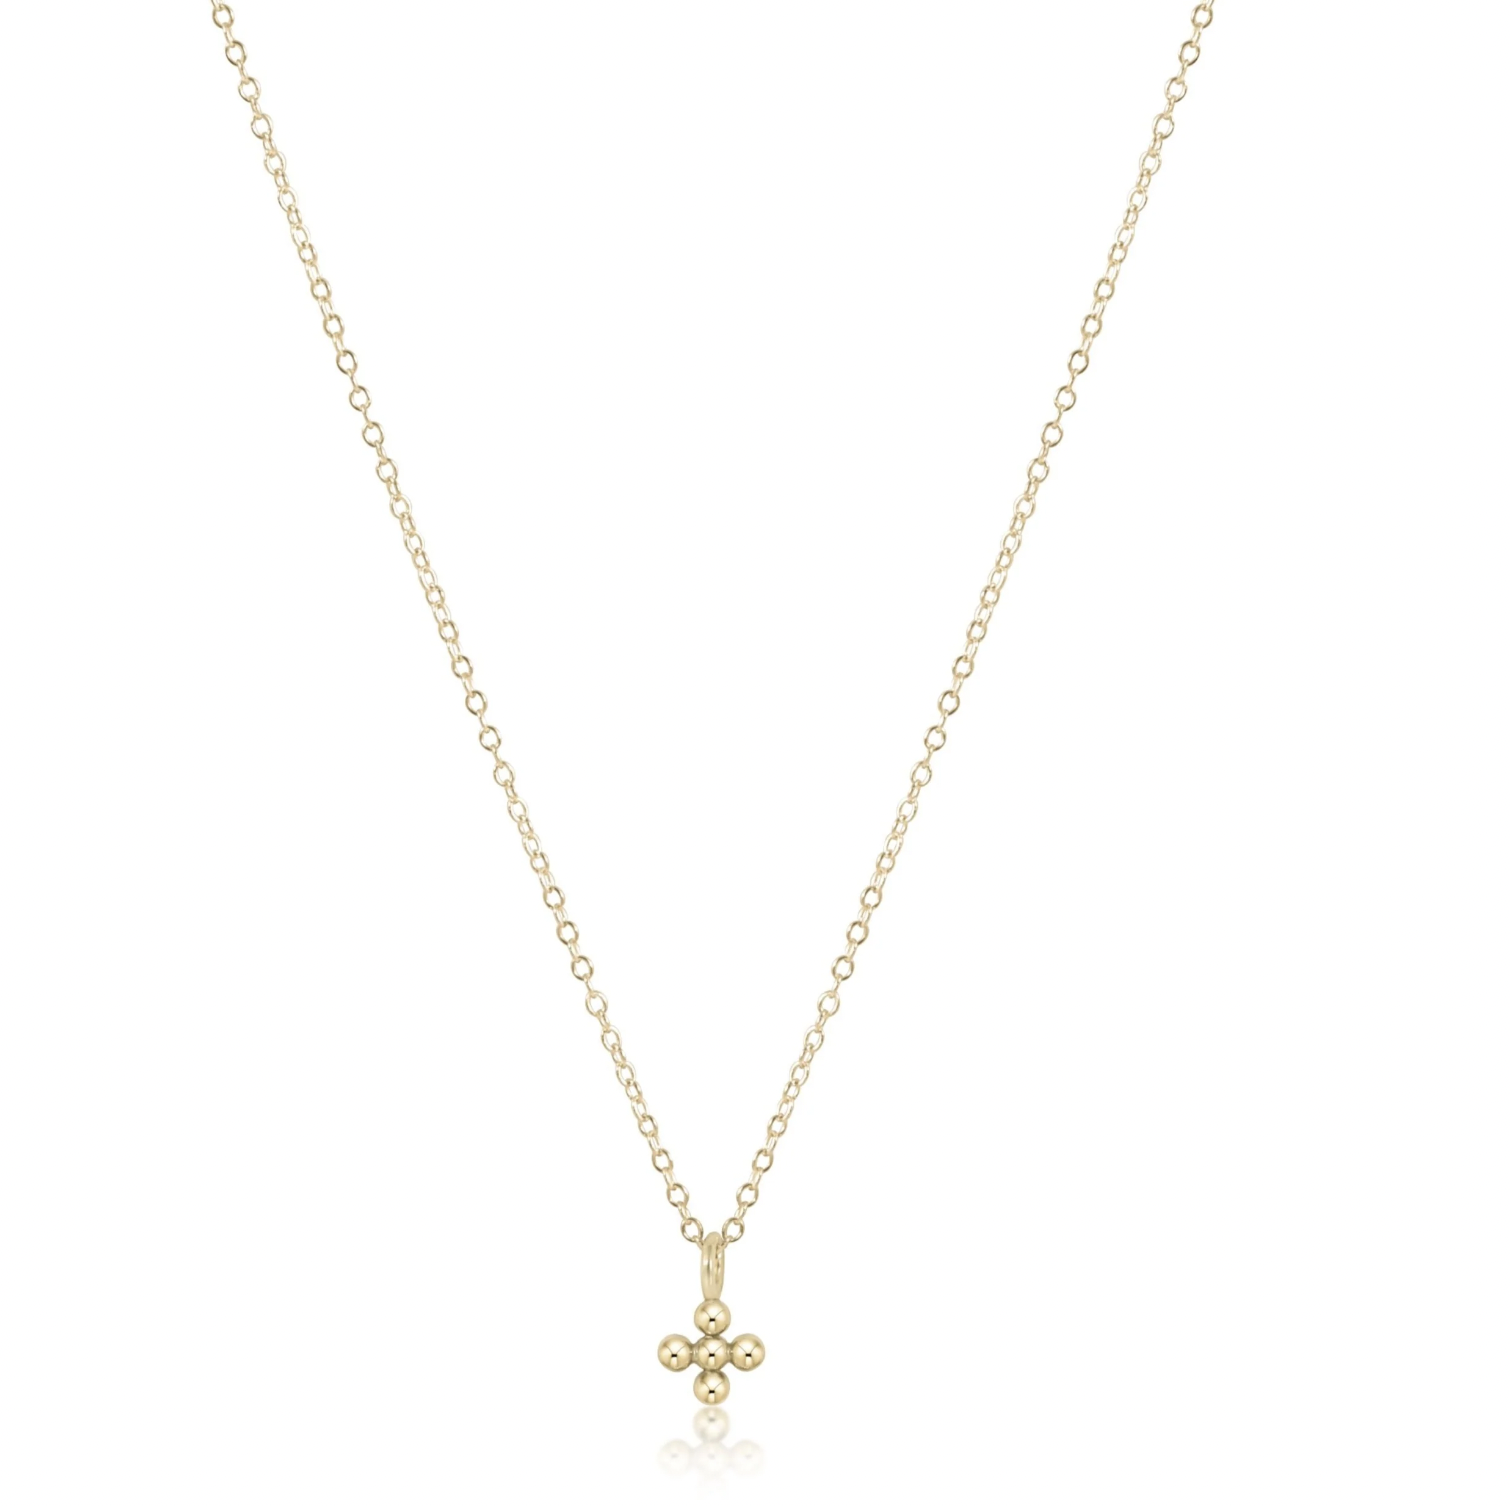 ENEWTON 16" NECKLACE GOLD-CLASSIC BEADED SIGNATURE CROSS SMALL GOLD CHARM